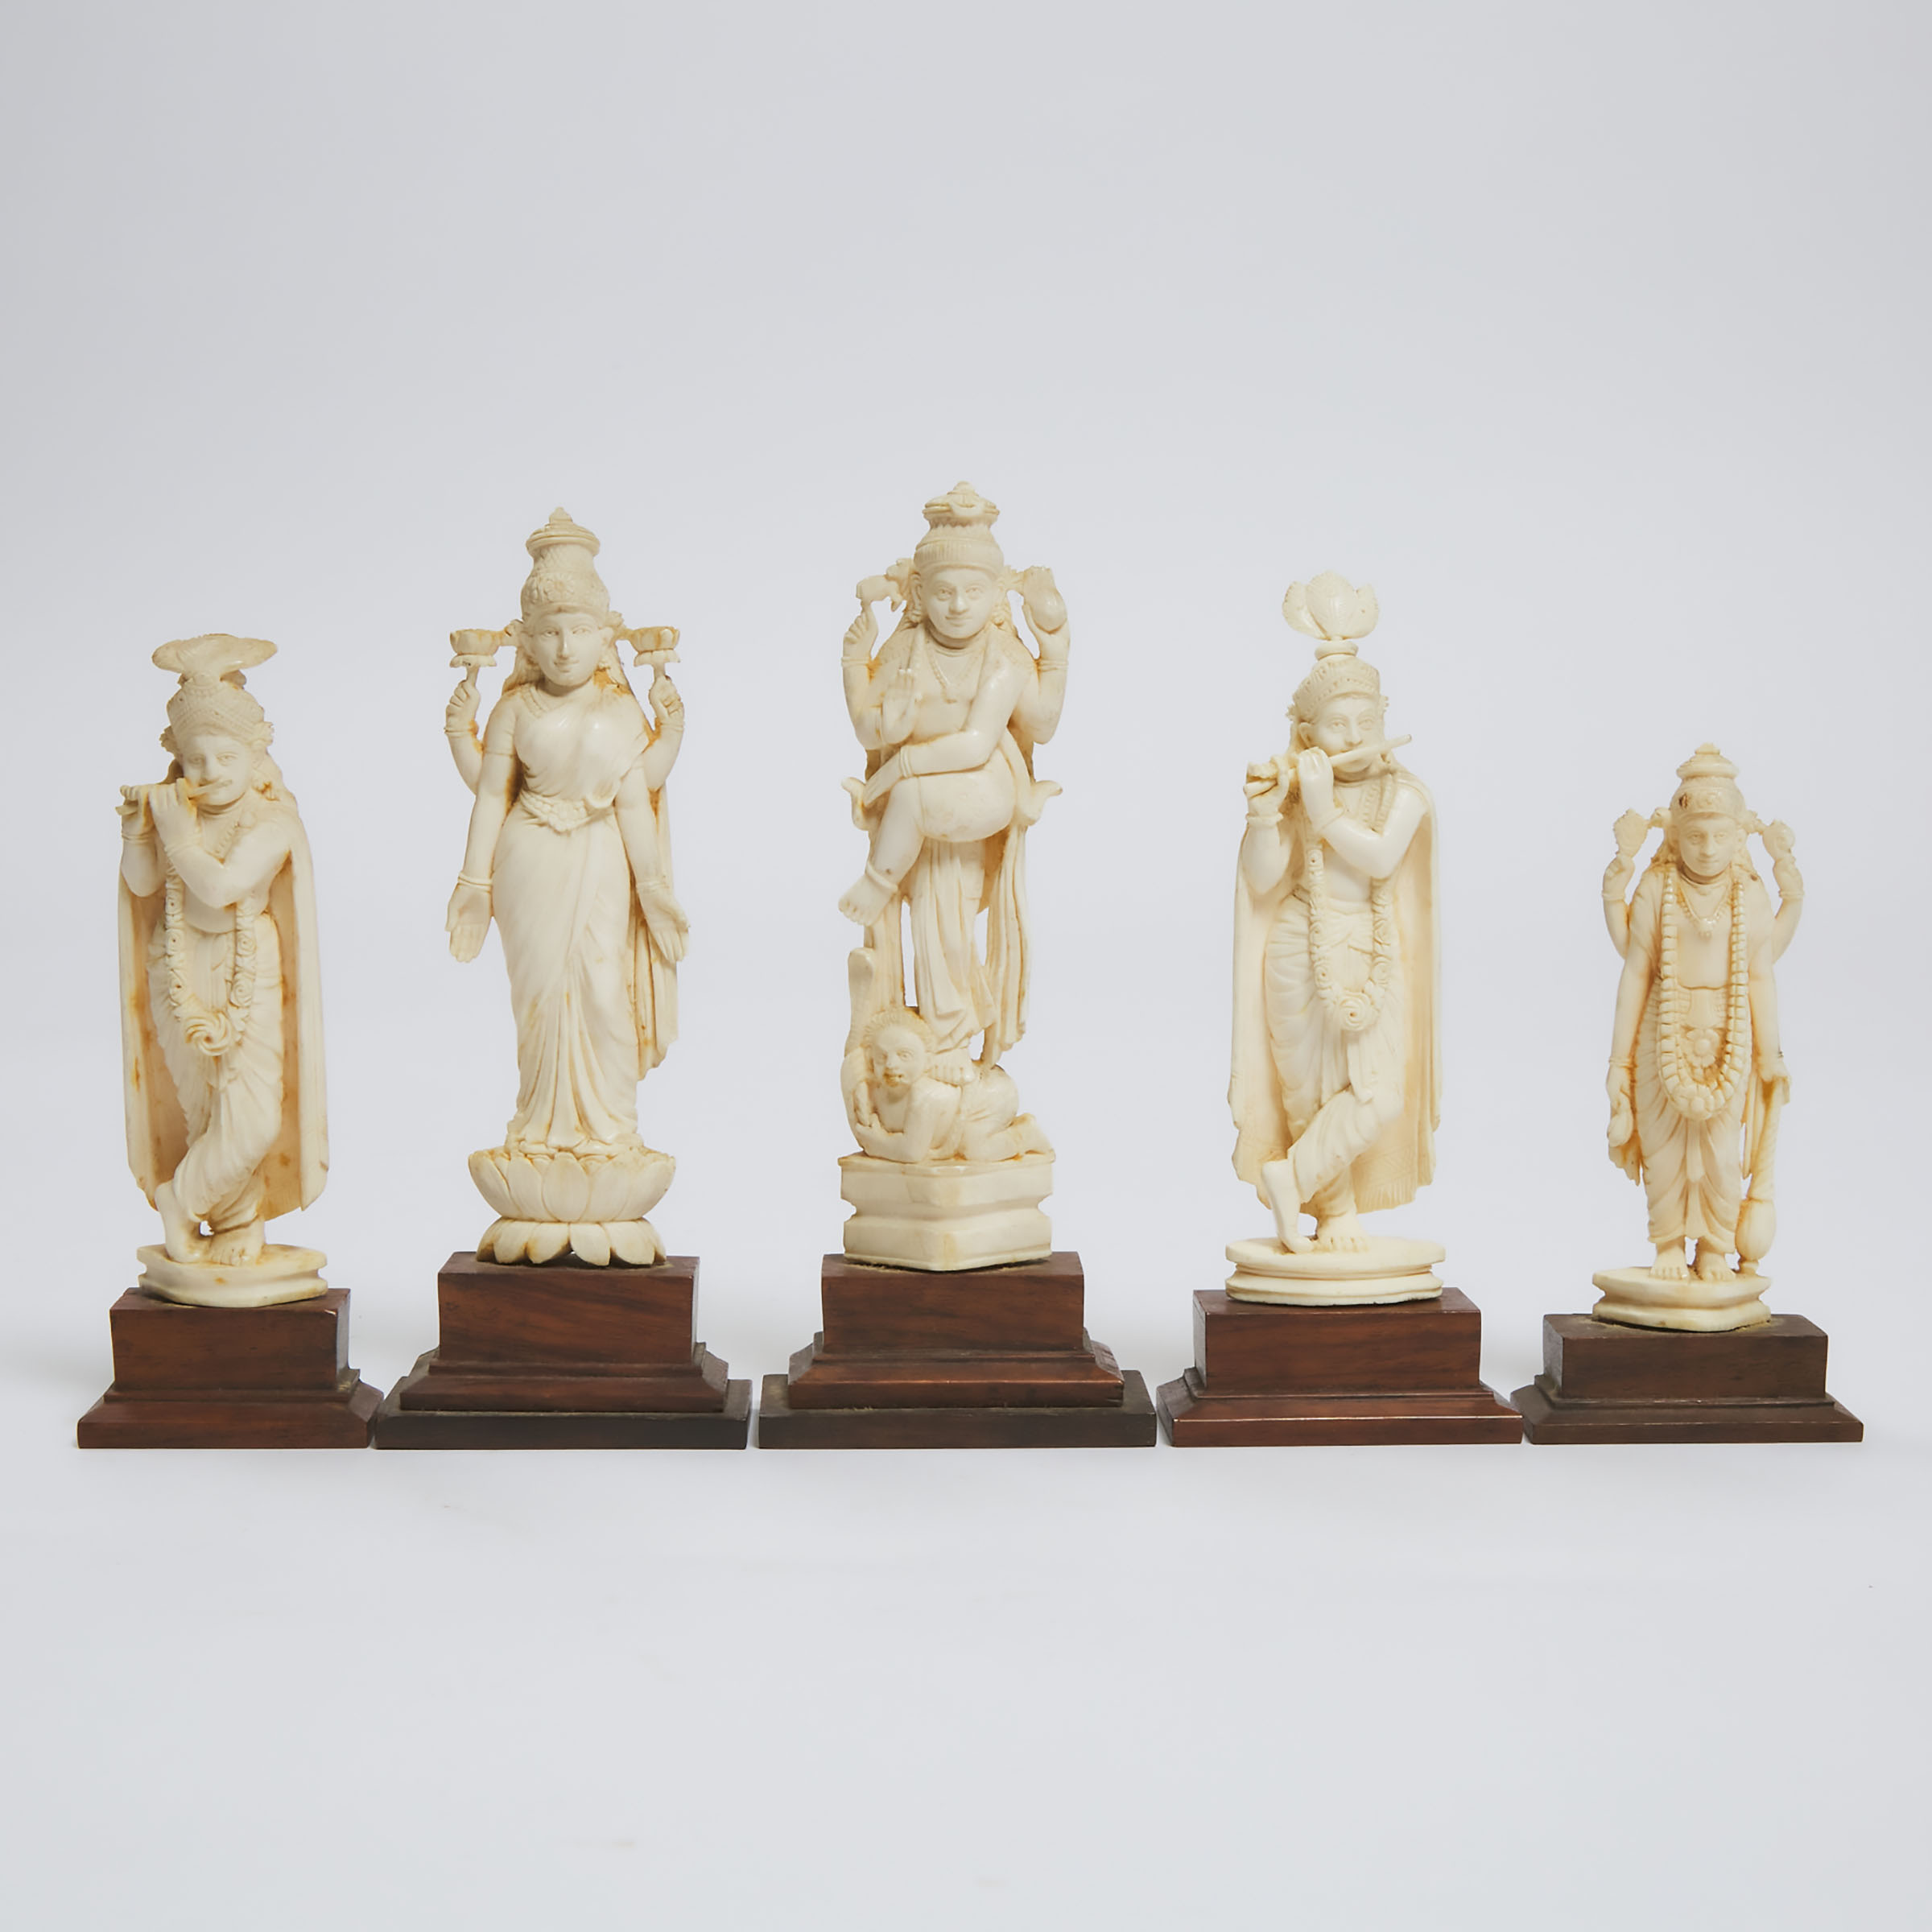 A Group of Five Indian Ivory Figures  3abbf3